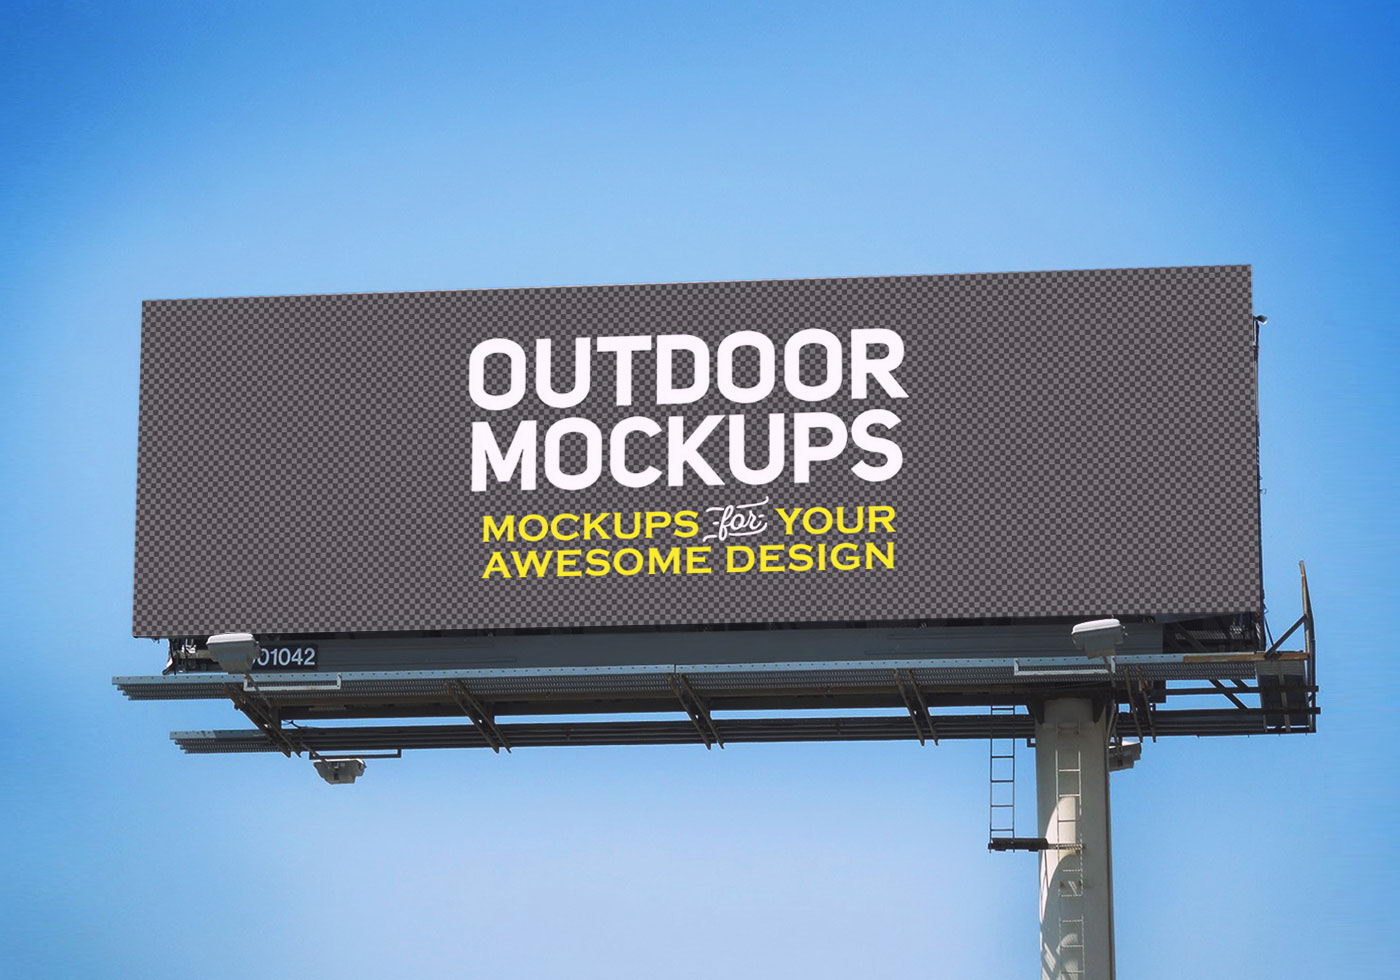 Download Mockup Outdoor Psd Free - Free Download Vector PSD and Stock Image